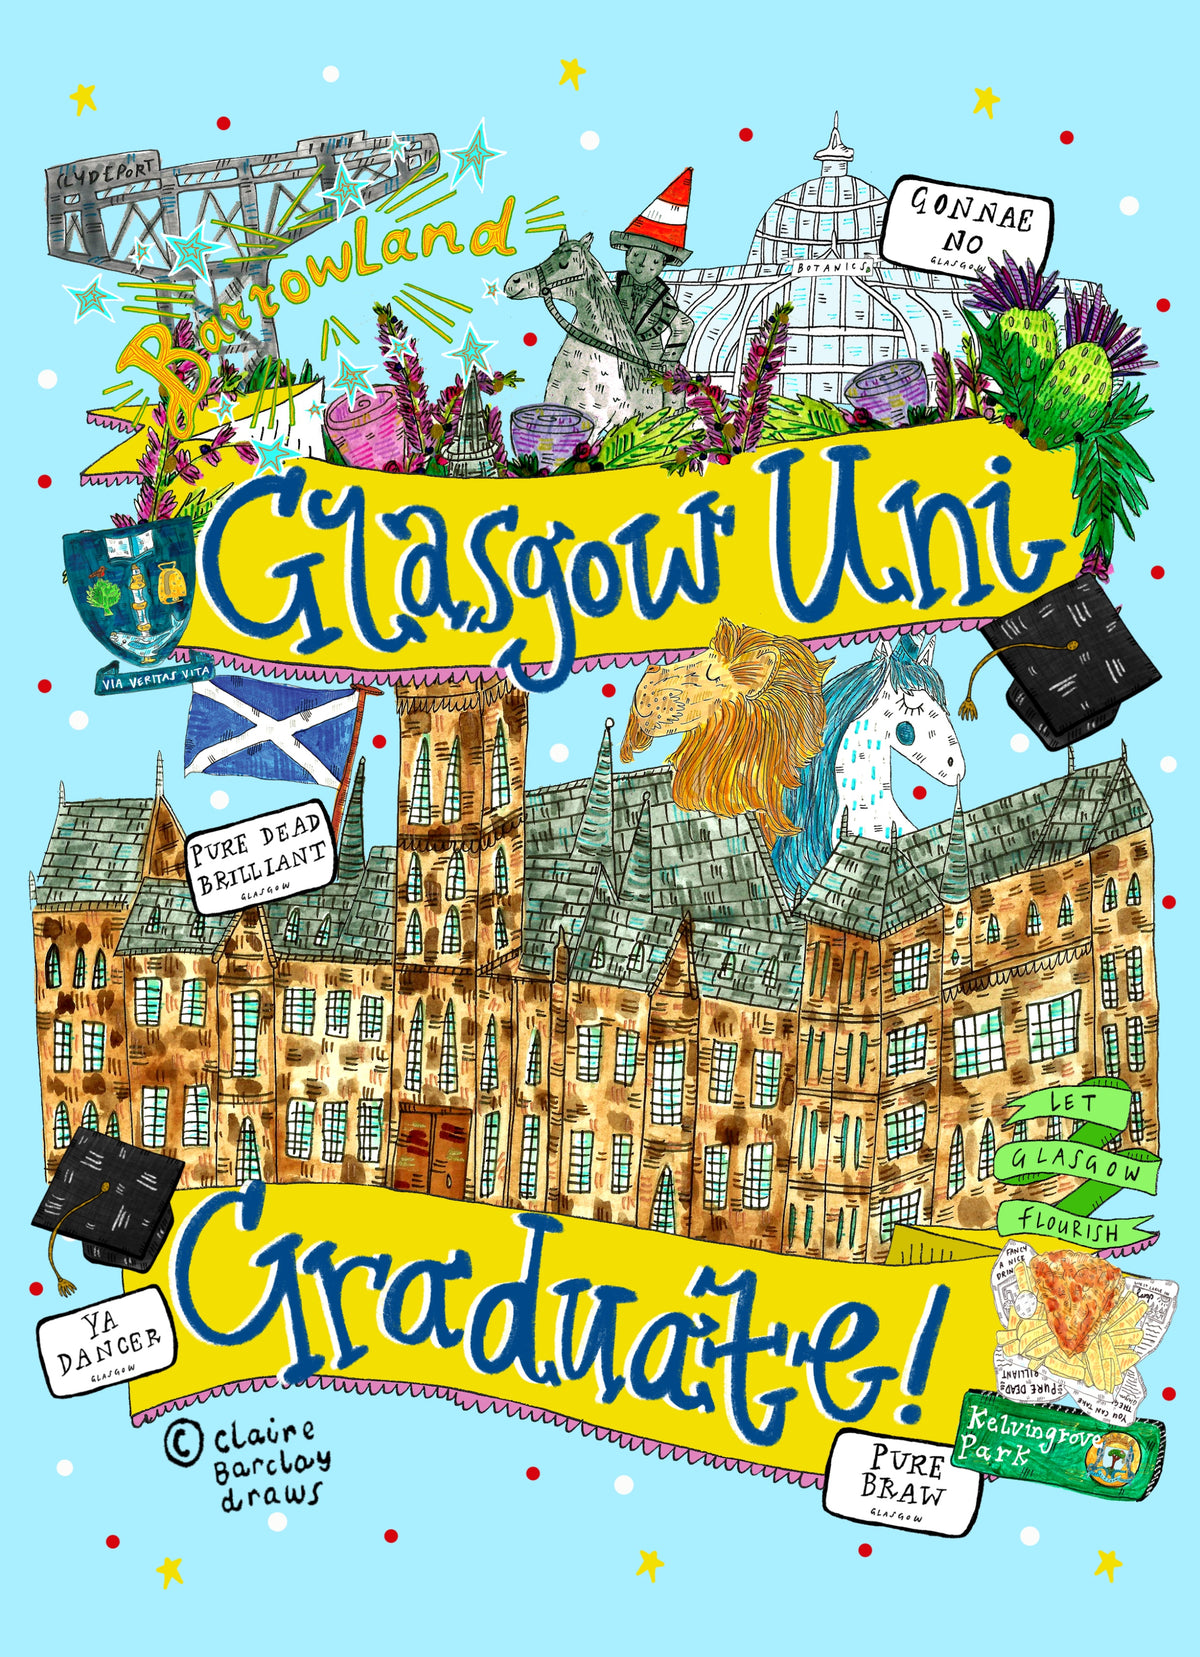 A greetings card with a light blue background with 2 large yellow banners with the words &#39;Glasgow Uni Graduate!&#39;. There are lots of illustrations of Glasgow including Glasgow University, The Finnieston Crane, Glasgow Botanic Gardens, The Wellington Statue and other Scottish famous icons.